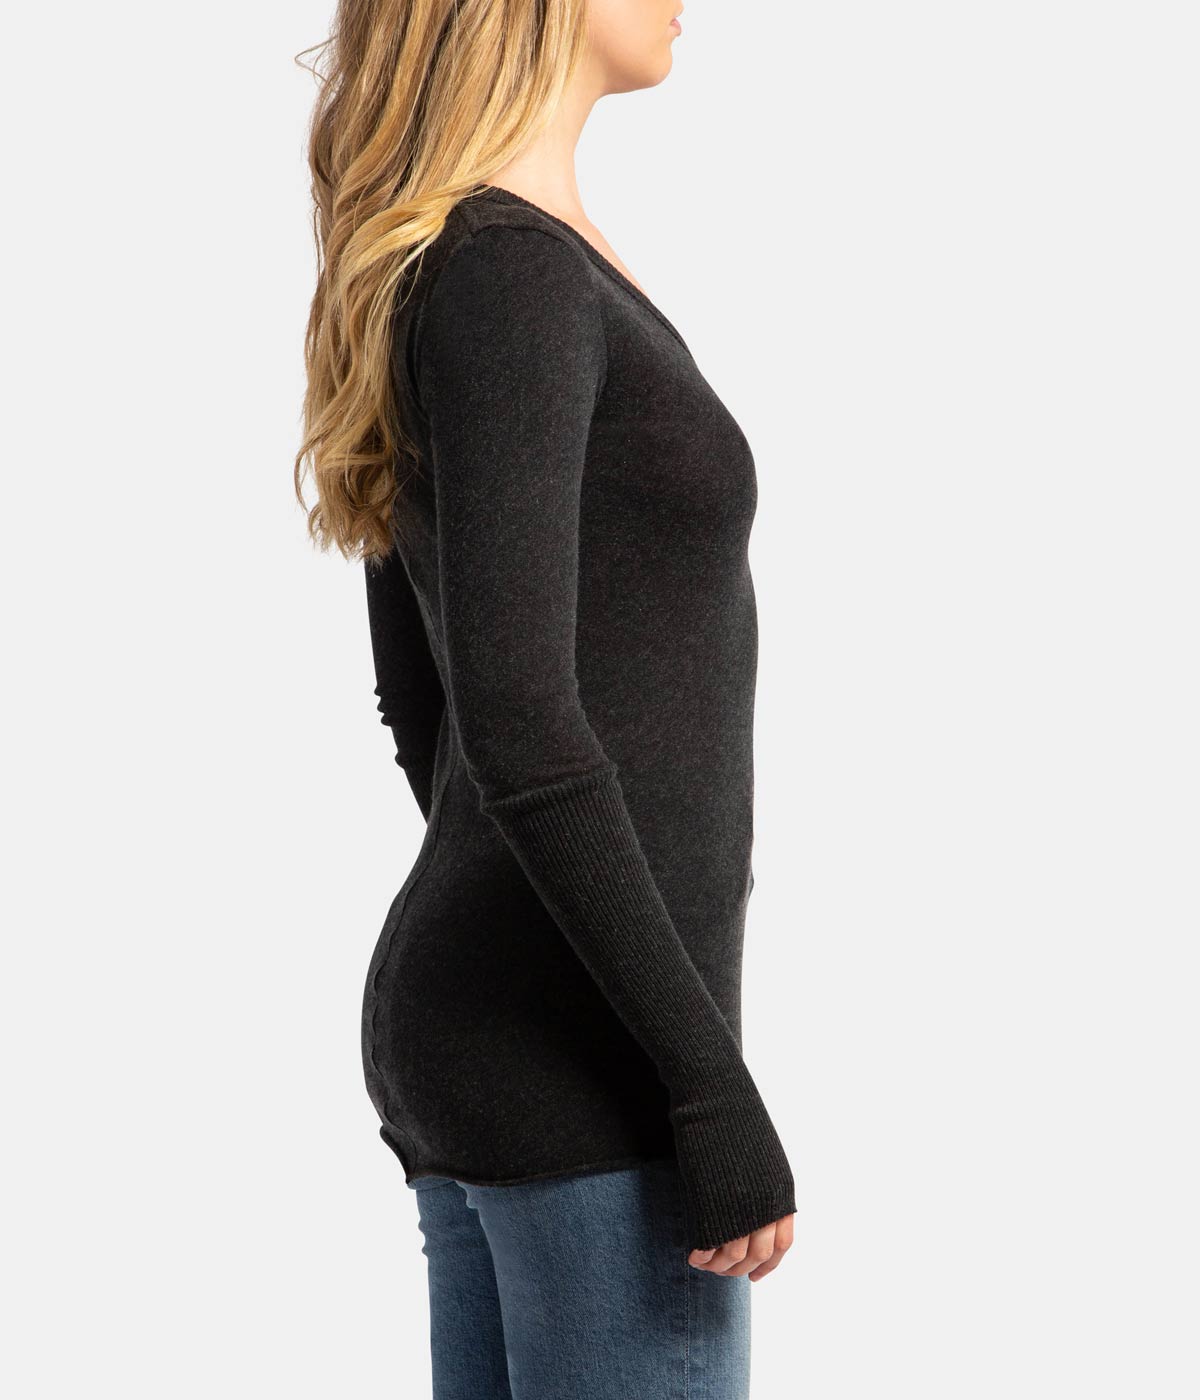 Cashmere V Neck Fitted Long Sleeve Top in Charcoal